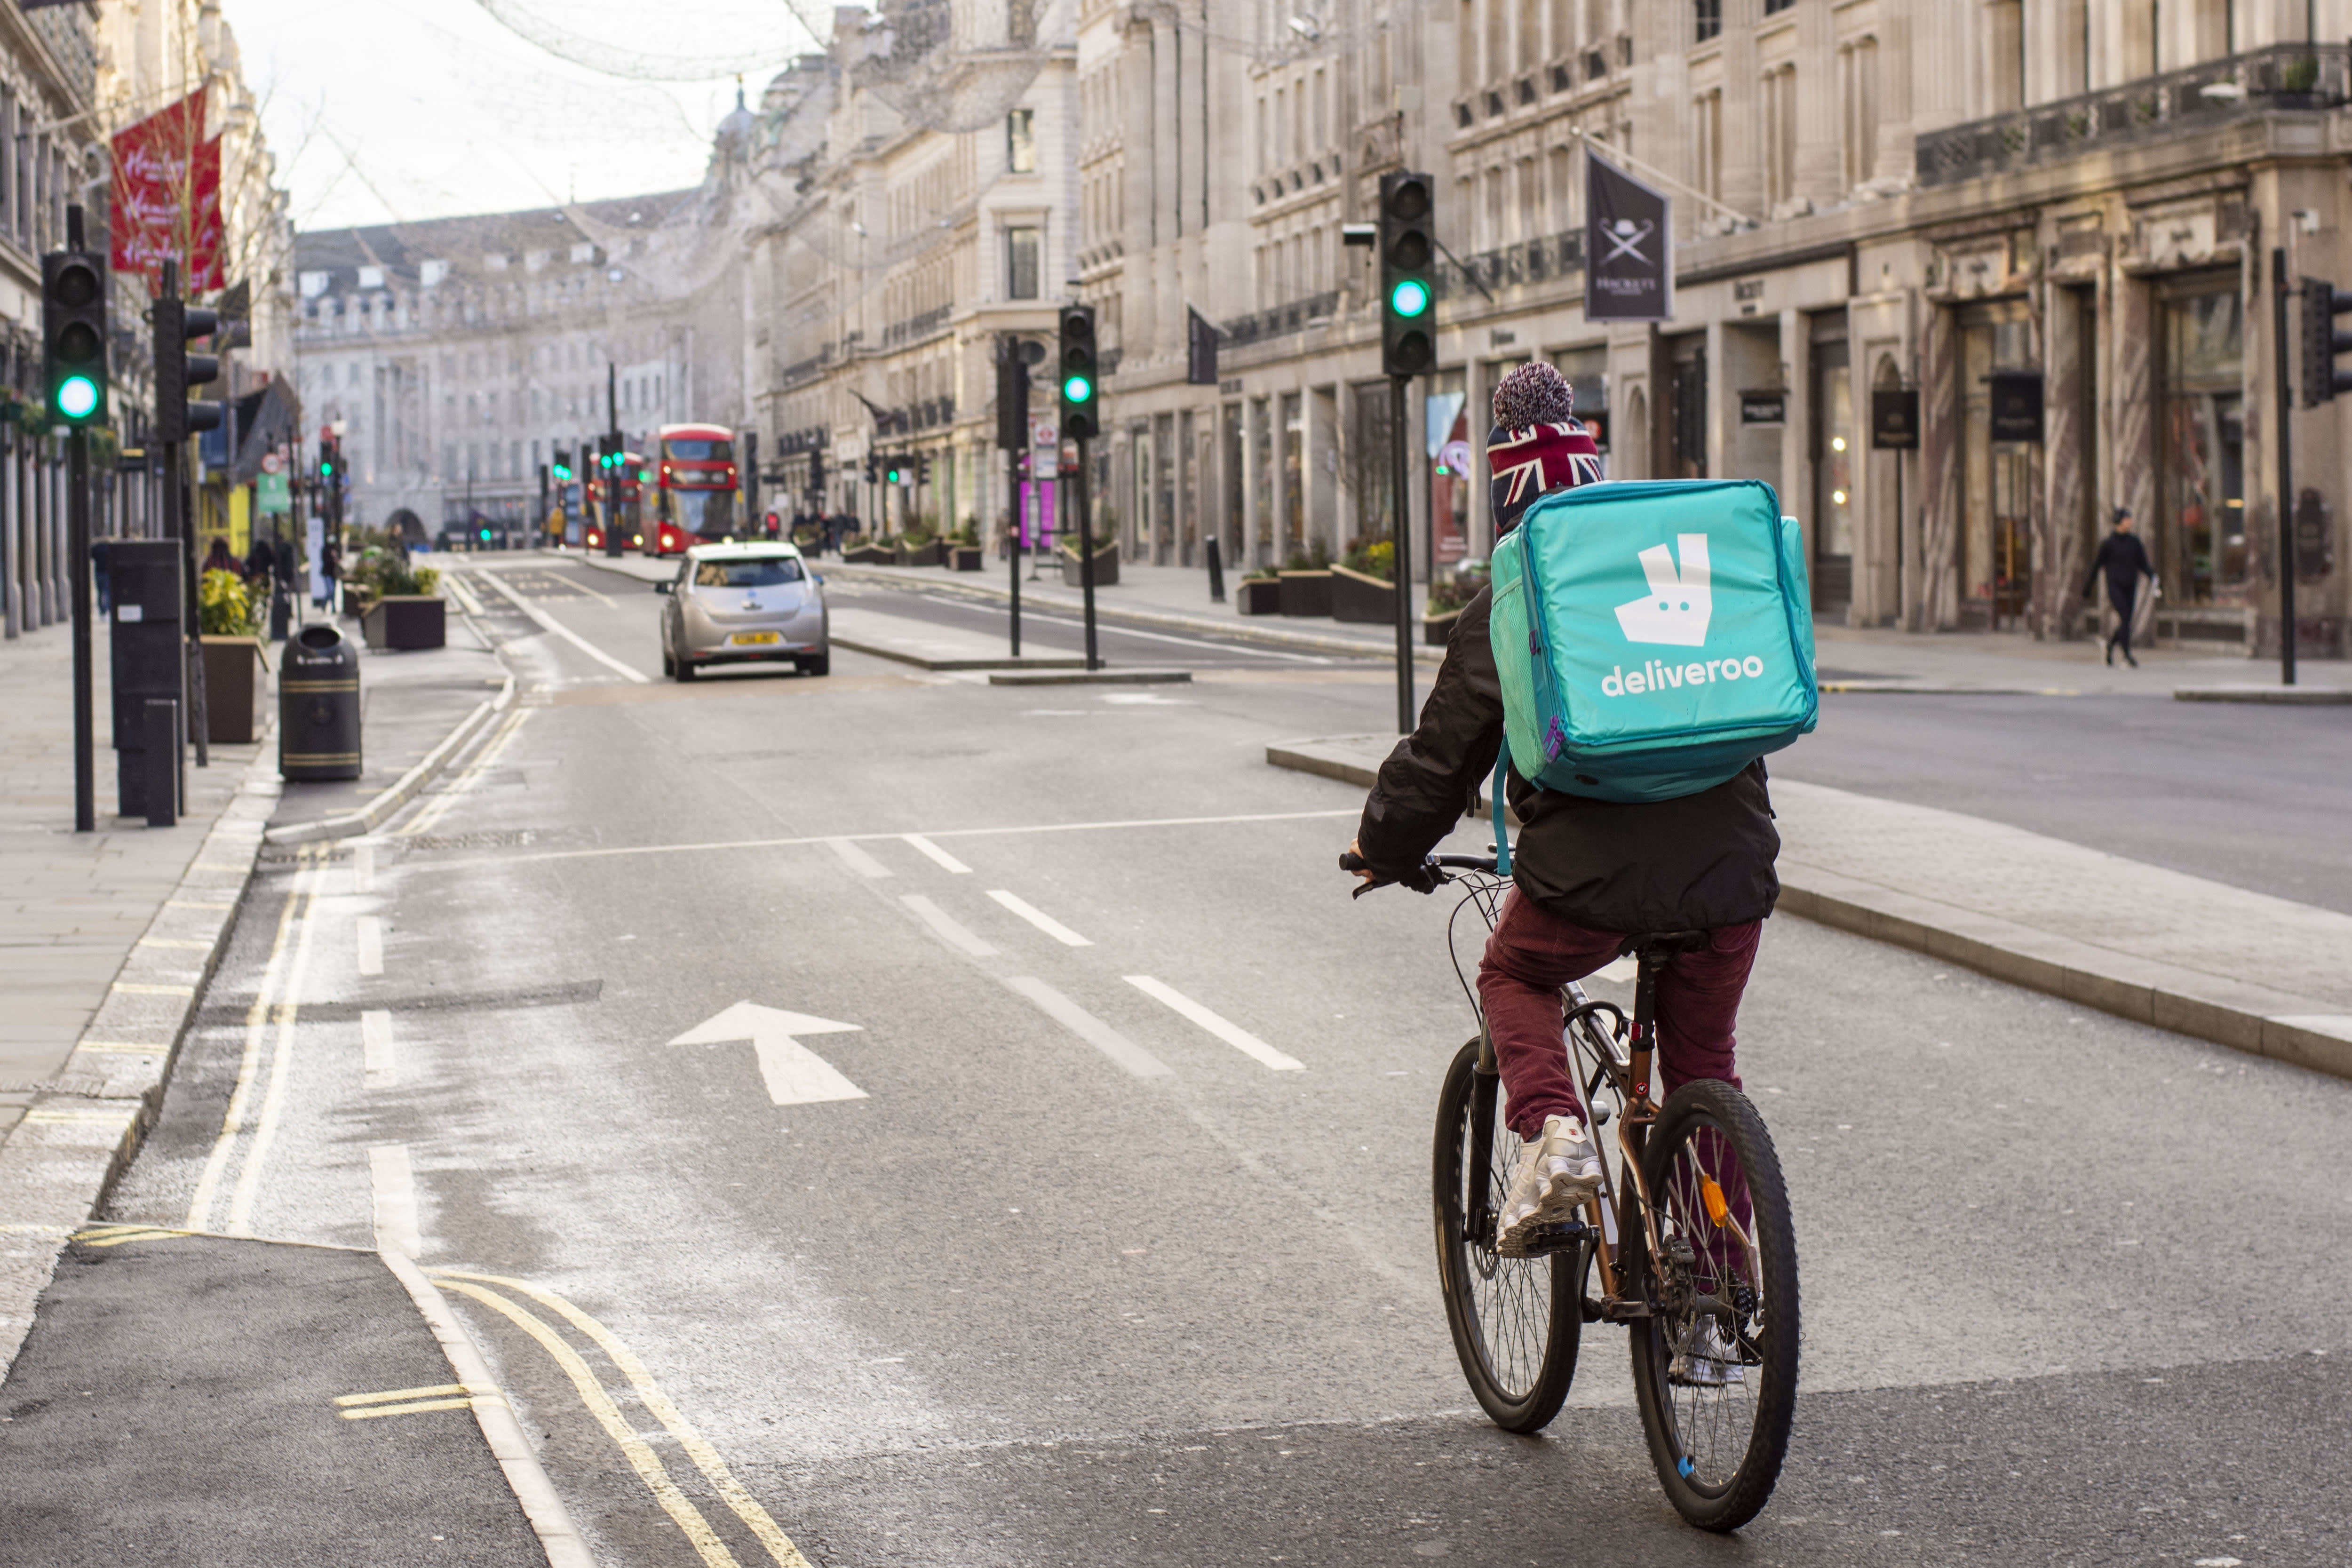 Deliveroo, backed by Amazon, intends to raise US $ 1.4 billion in the next IPO